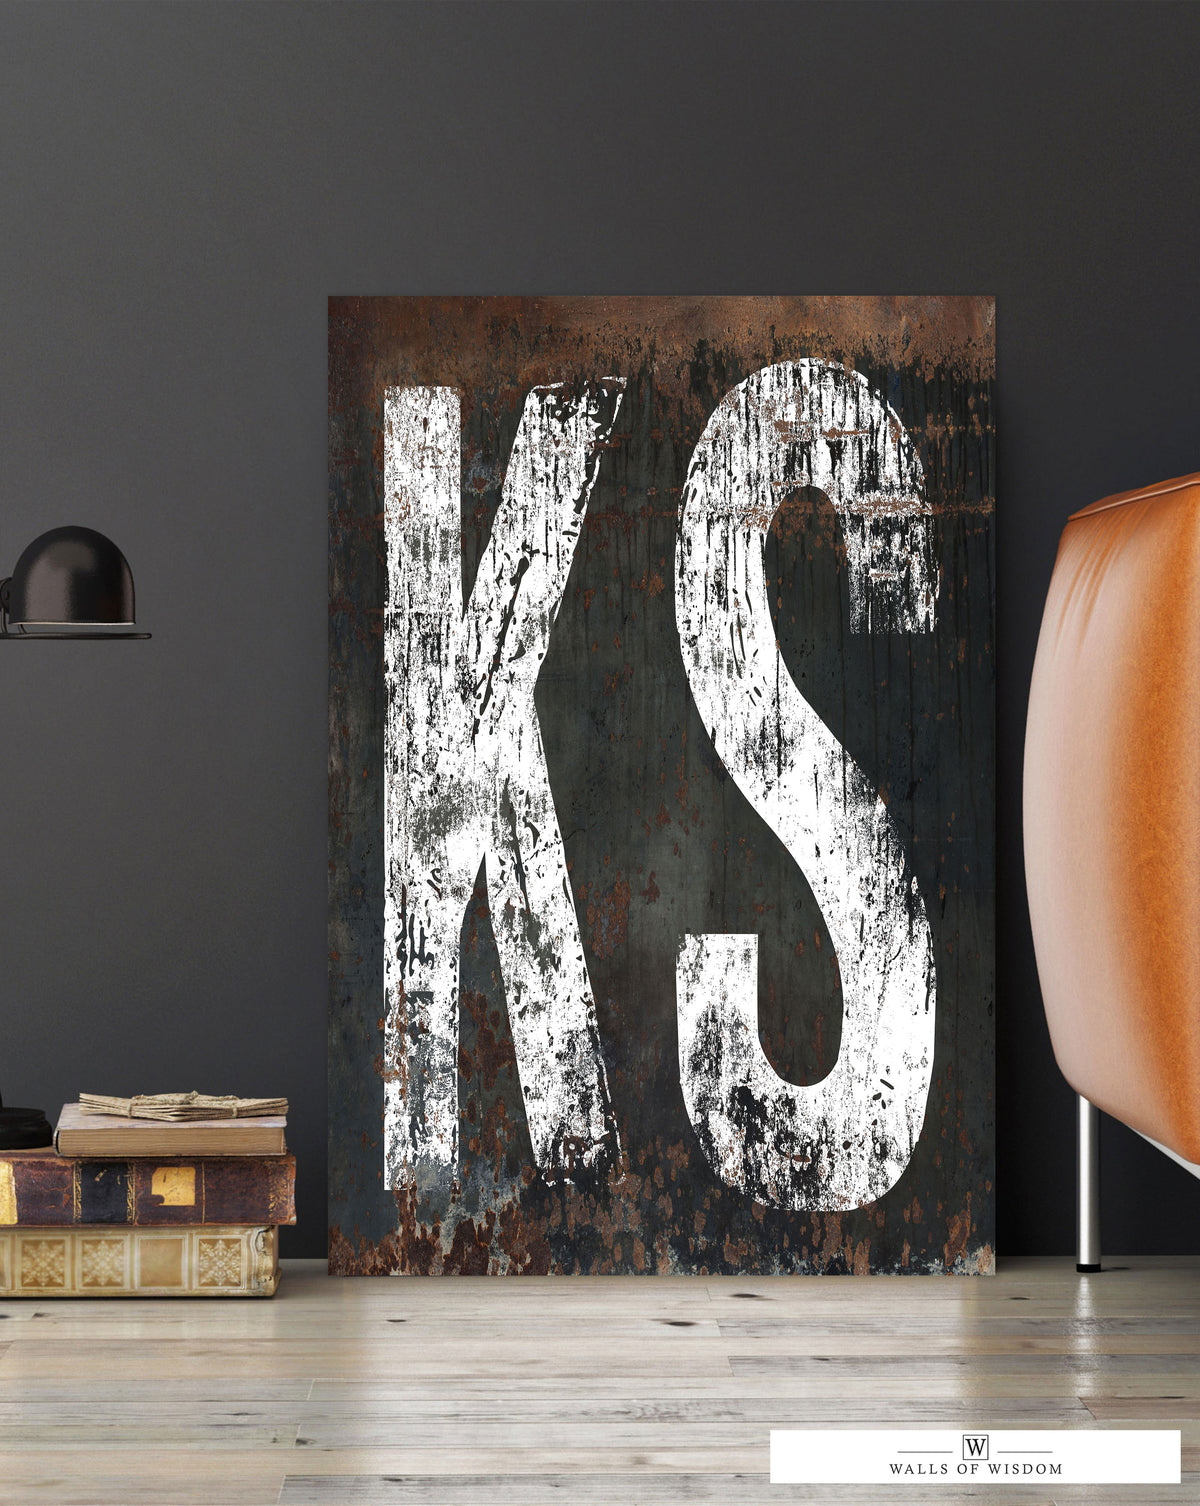 Rustic Western Kansas Home State Canvas Wall Art - KS State Vintage Inspired Industrial Farmhouse Art Print